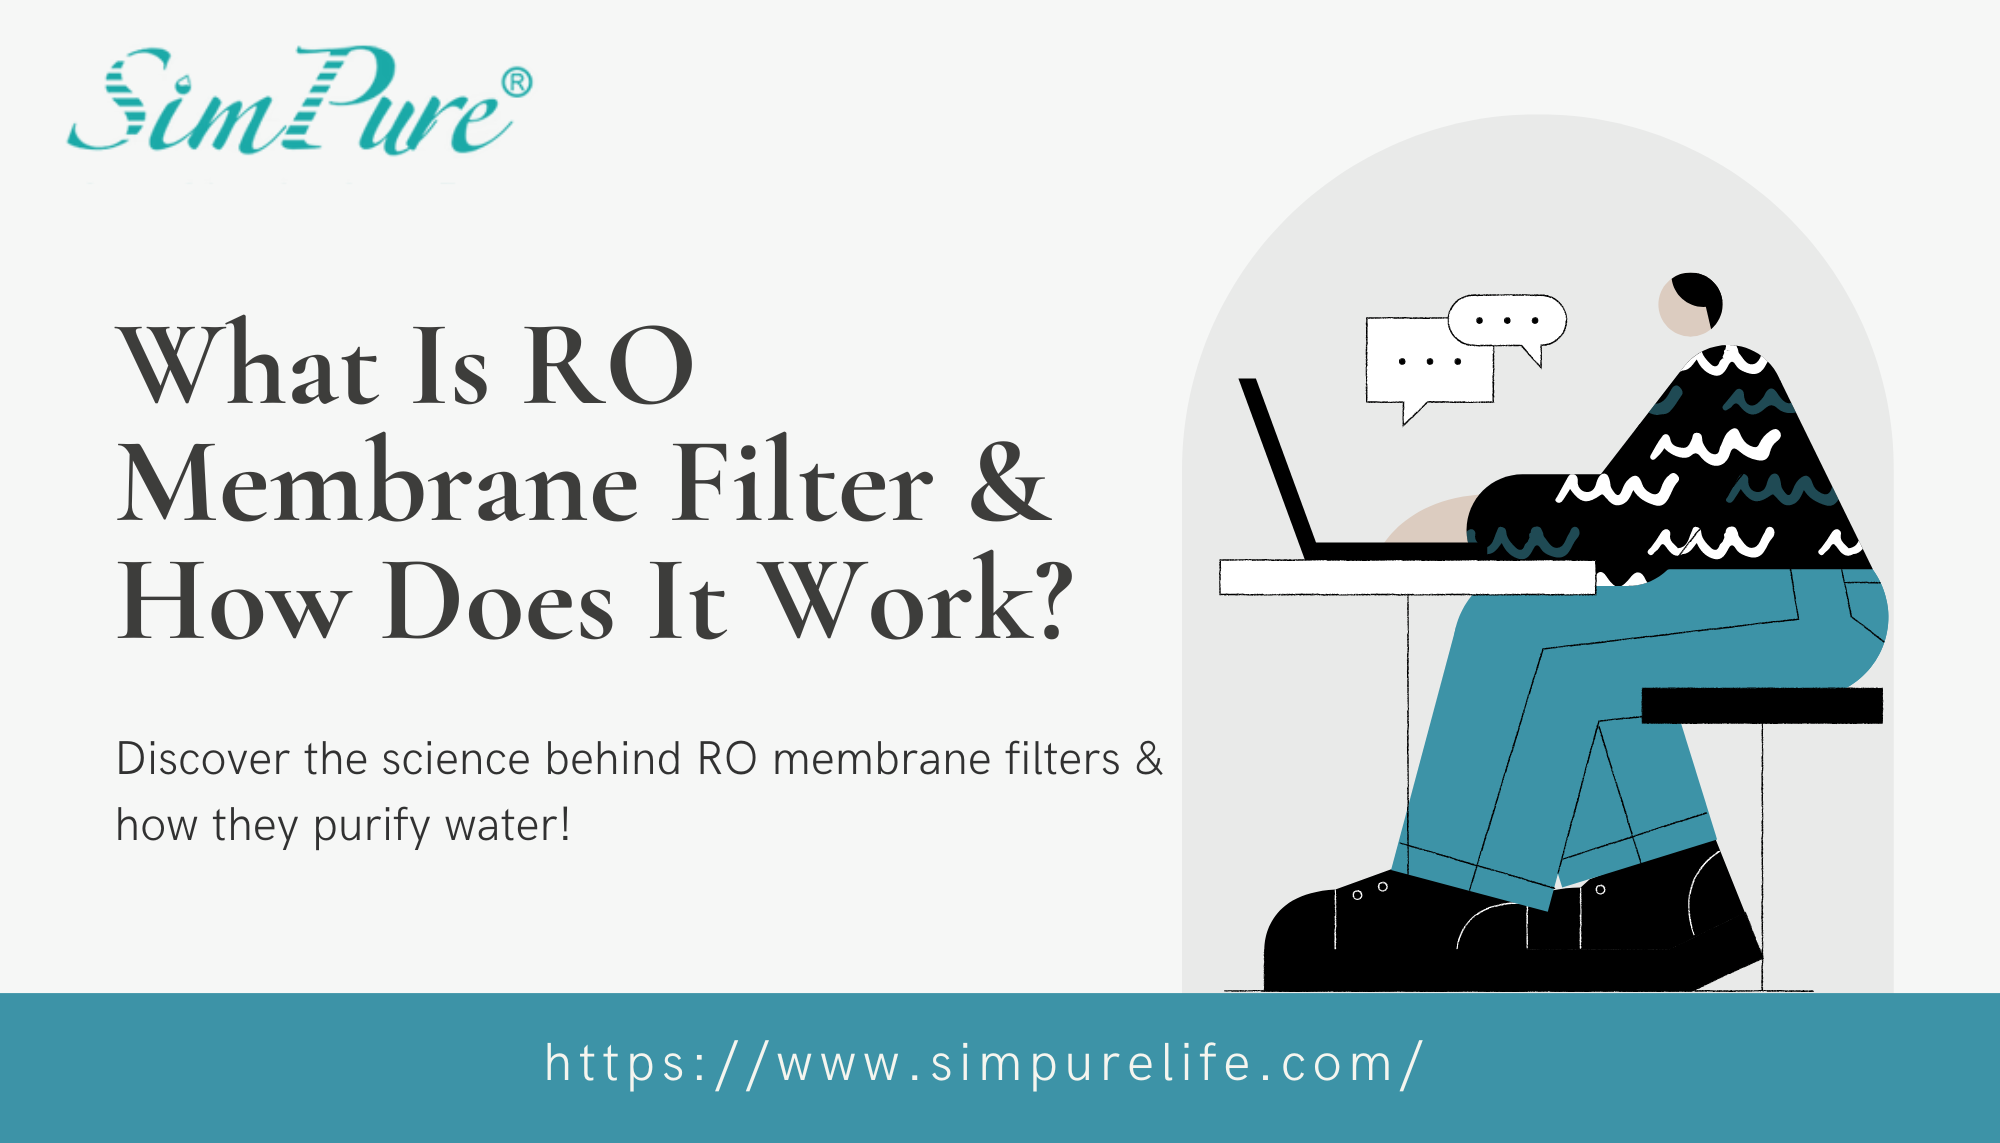 What Is RO Membrane Filter & How Does It Work?